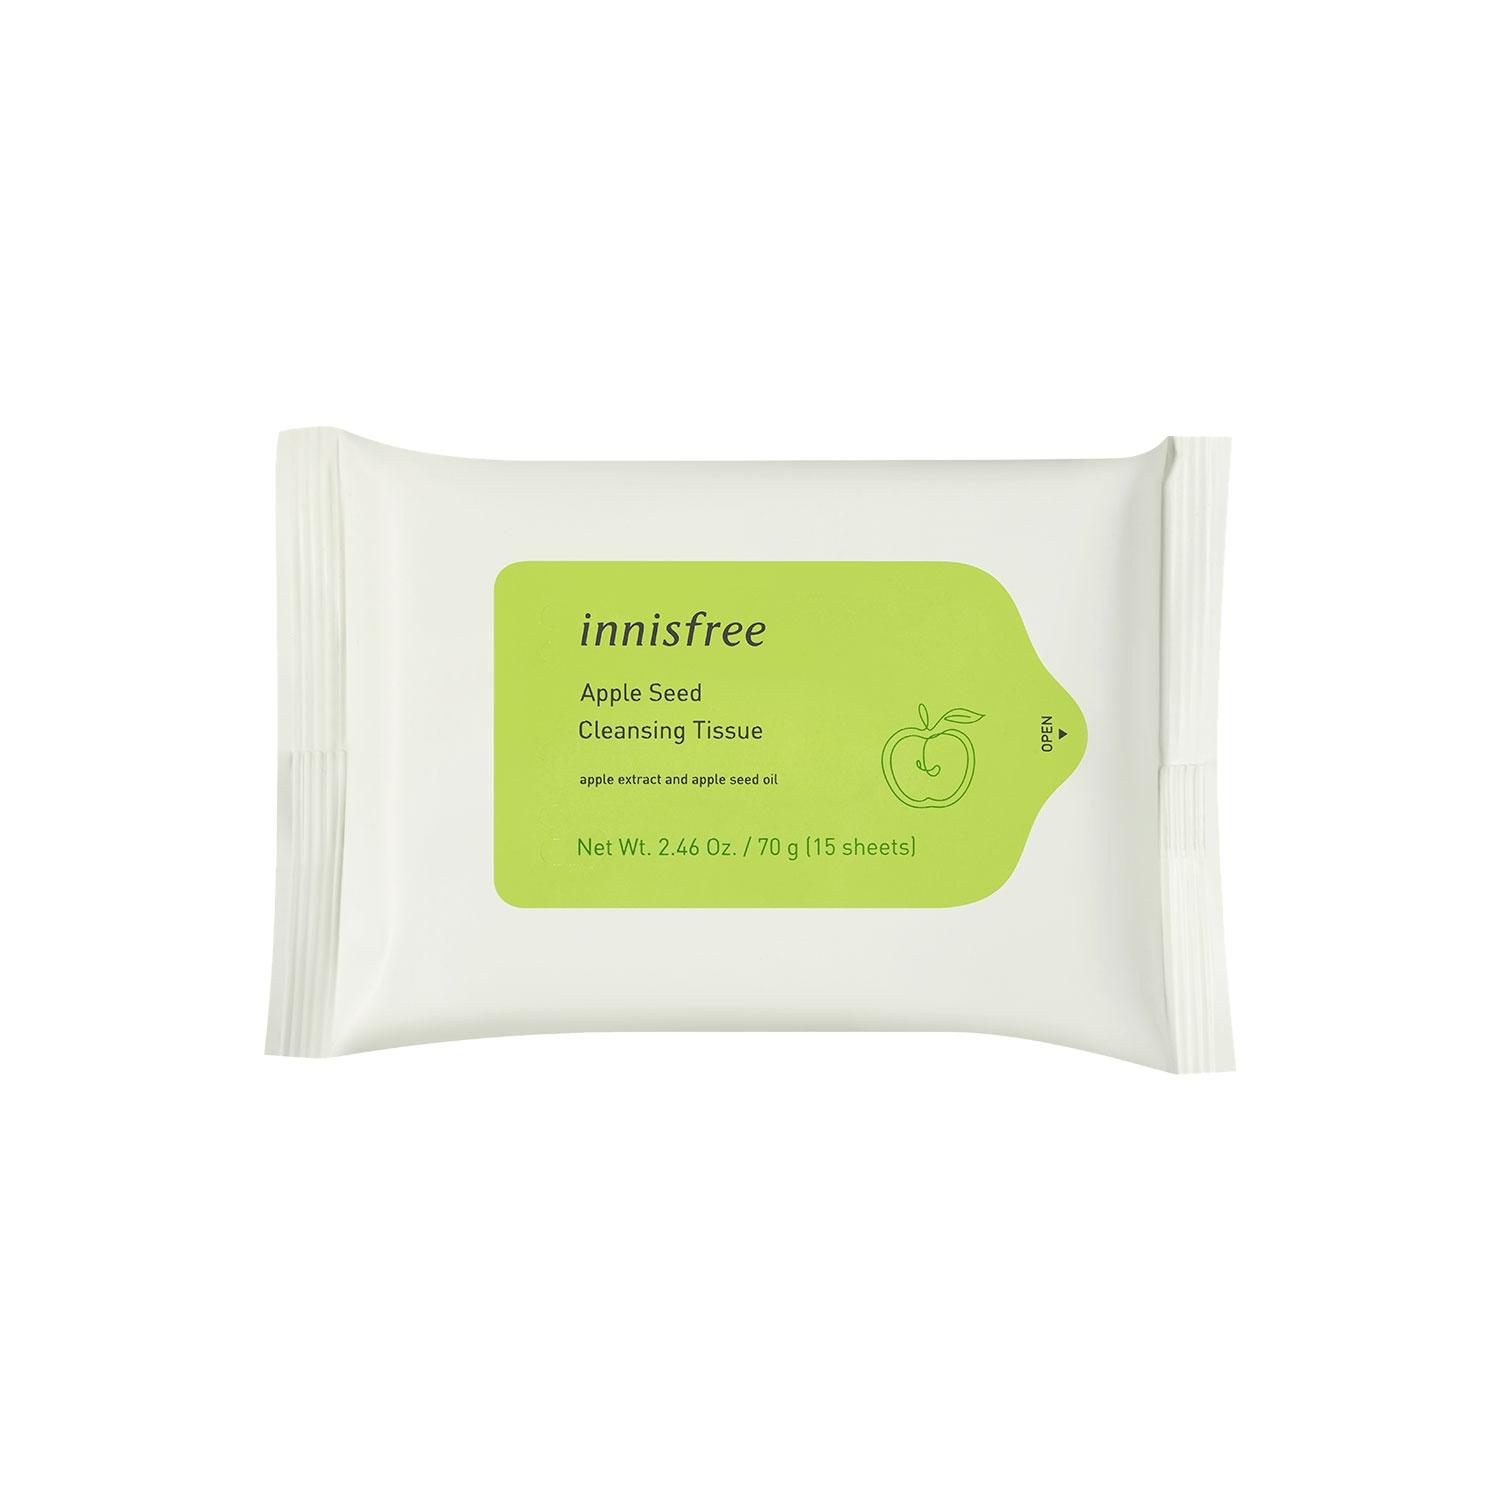 innisfree-apple-seed-cleansing-tissue-(150g)